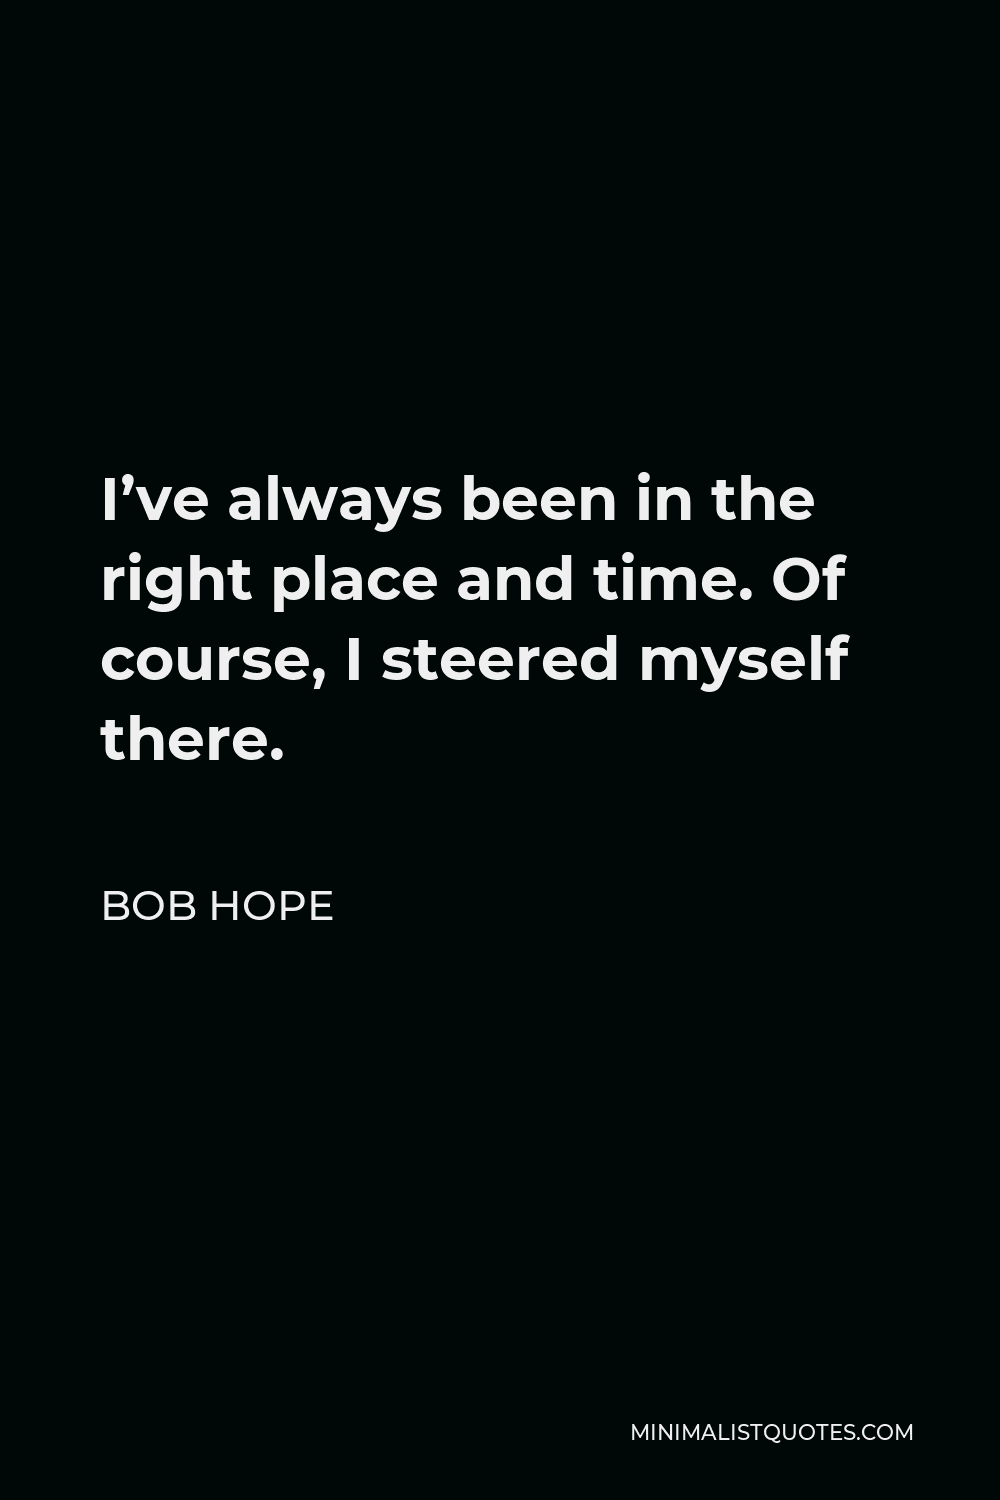 Bob Hope Quote - I’ve always been in the right place and time. Of course, I steered myself there.